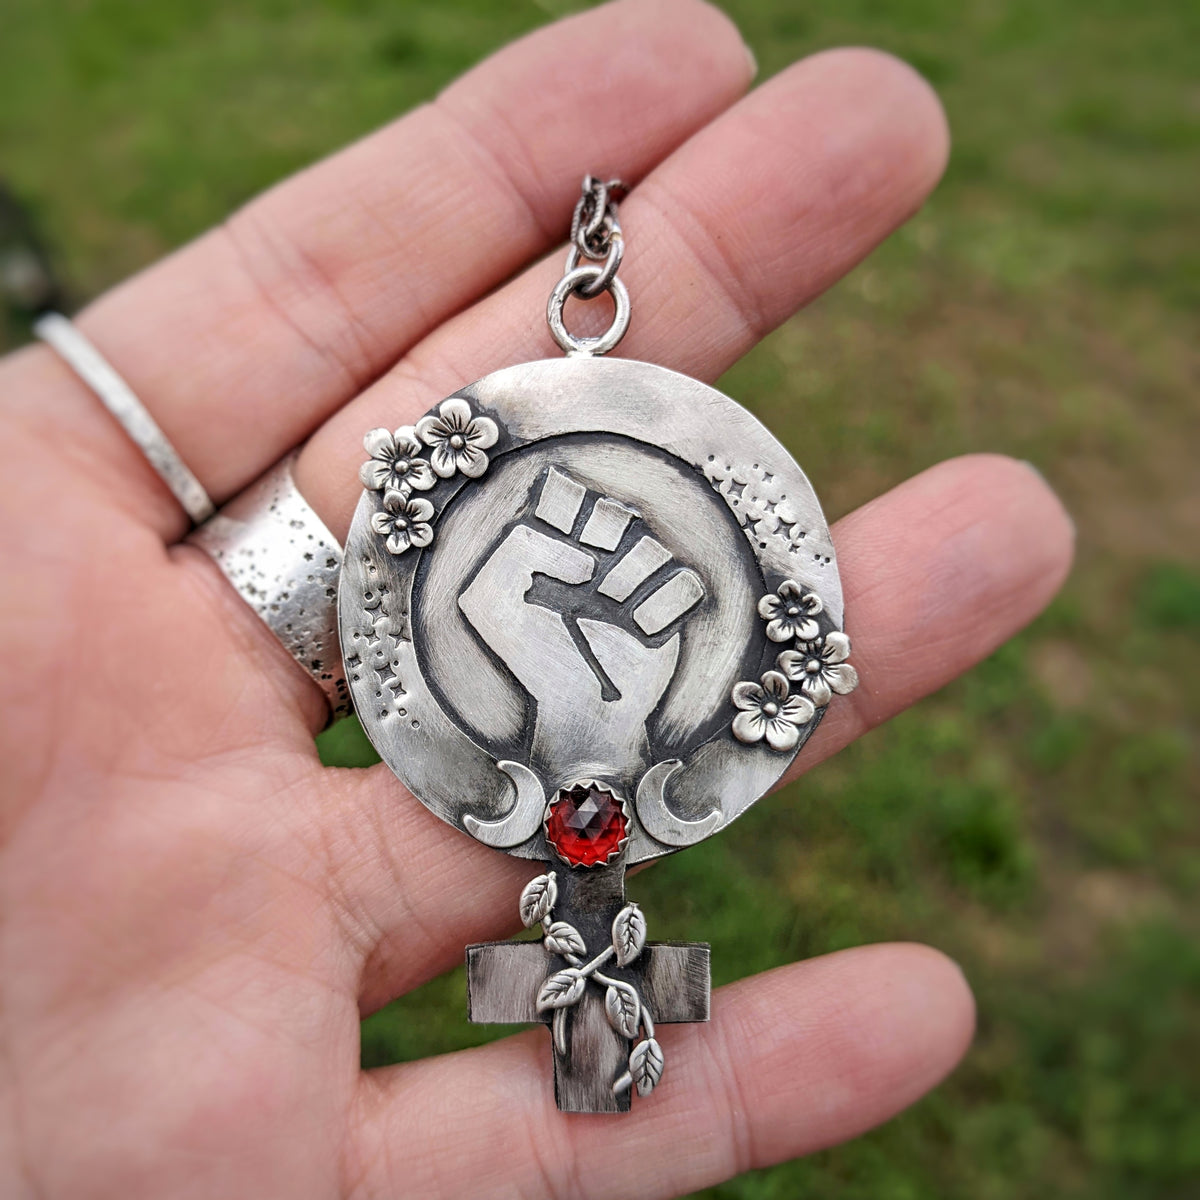 Feminist Fist Necklace with Garnet and Flowers